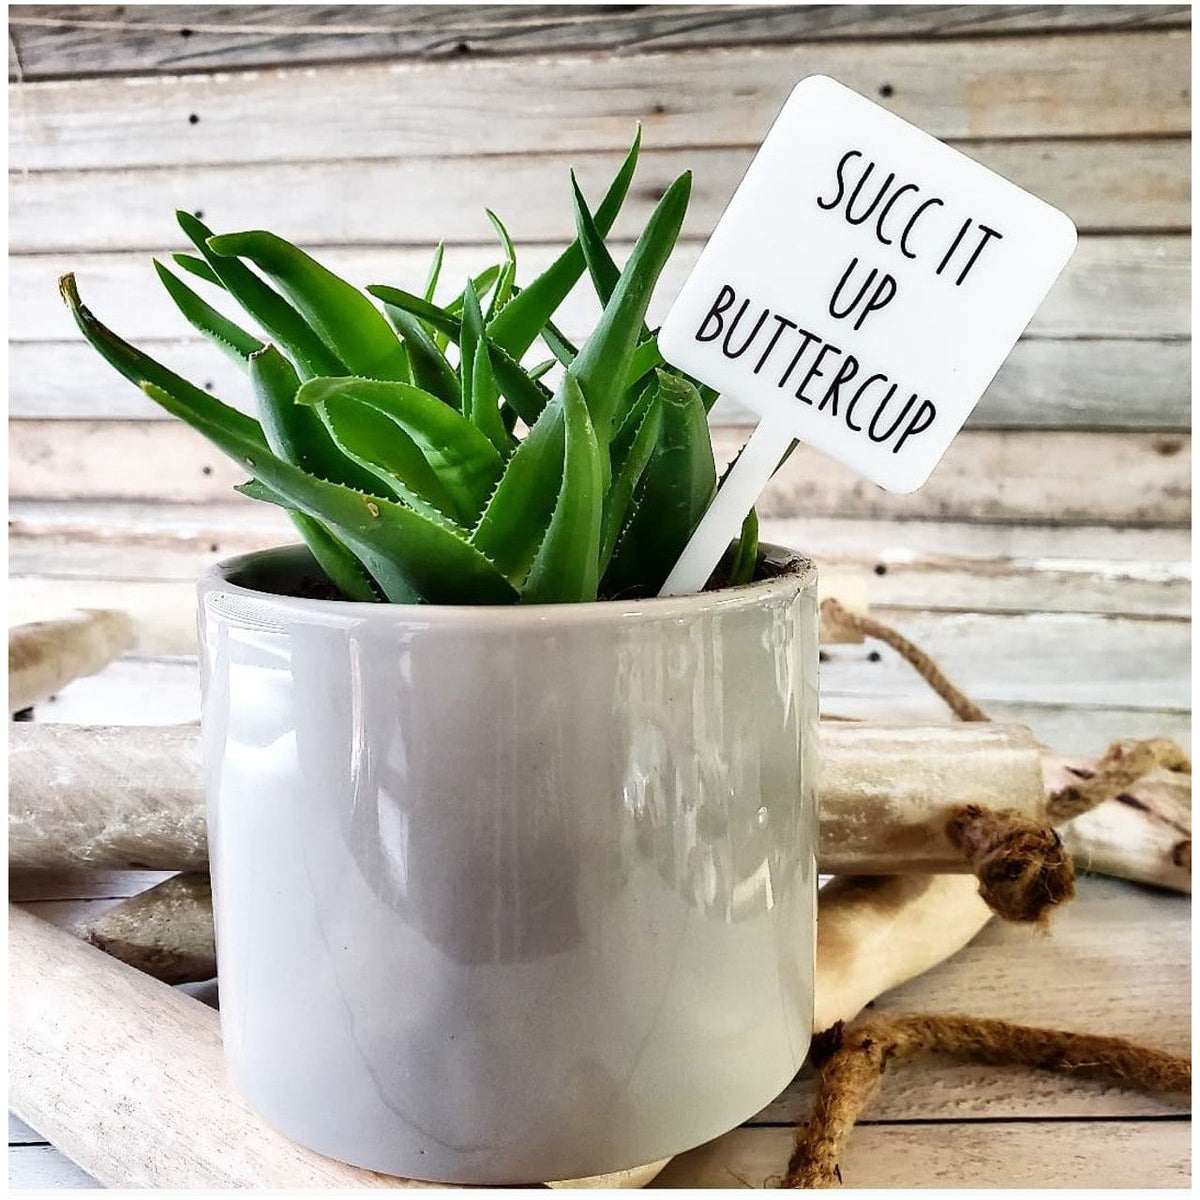 Snarky Plant Marker Stake - Succ It Up Buttercup